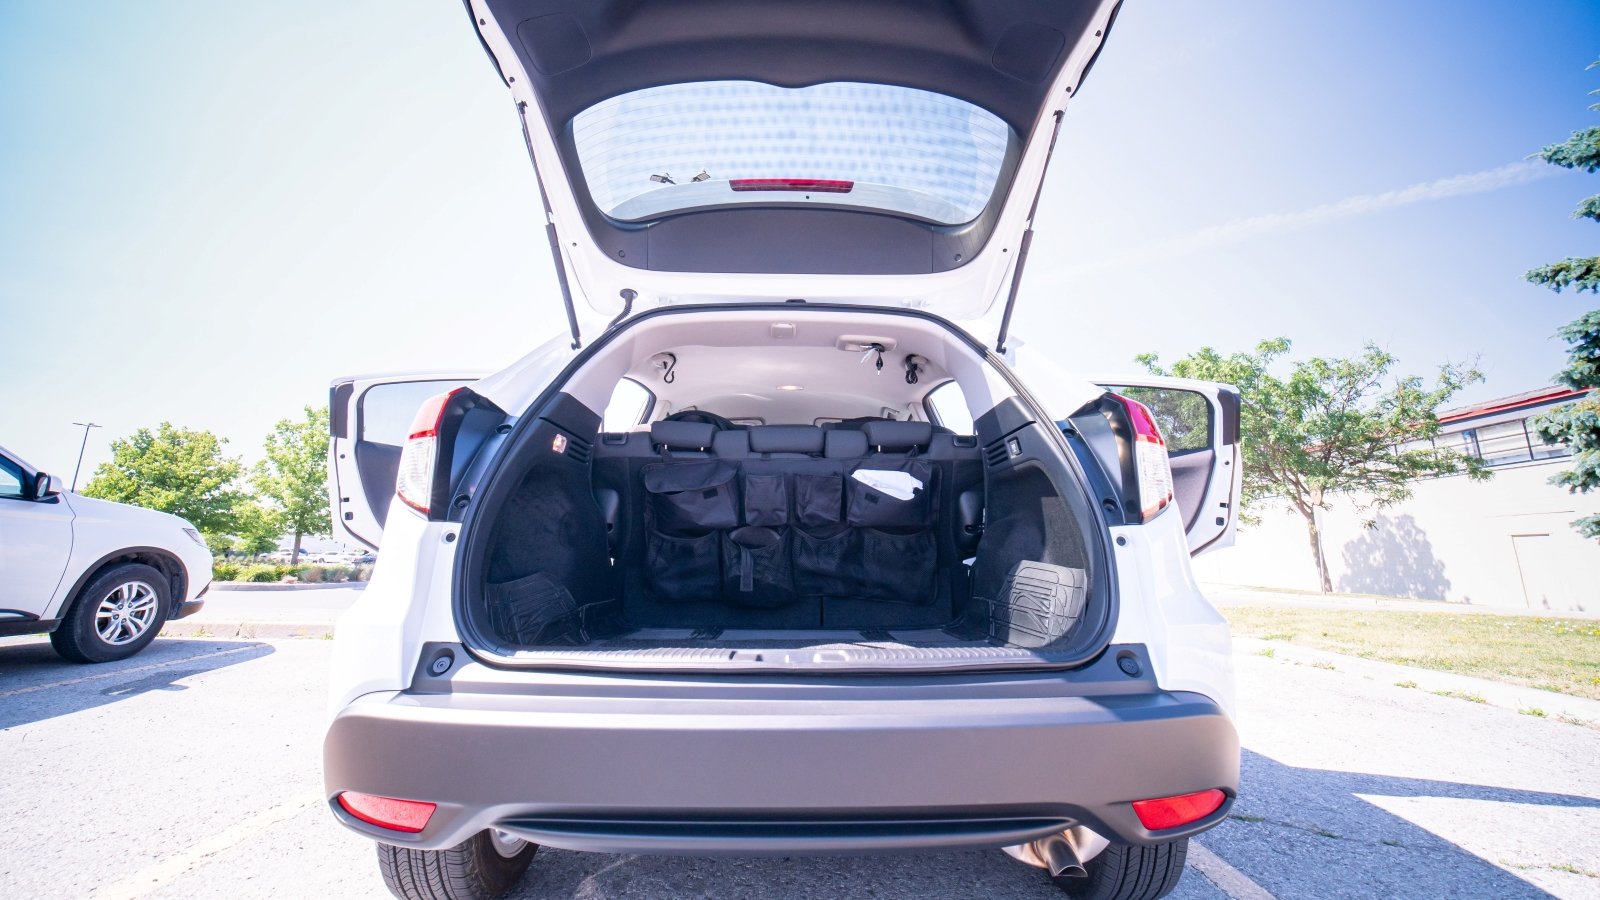 <p>  <span>While having an organized trunk can be convenient, cargo organizers offered by dealerships are often priced much higher than similar products you can find at other retailers or online. Unless it’s a specialized item designed to fit your specific model perfectly, you’re likely better off looking elsewhere for your organization needs.</span>  </p>